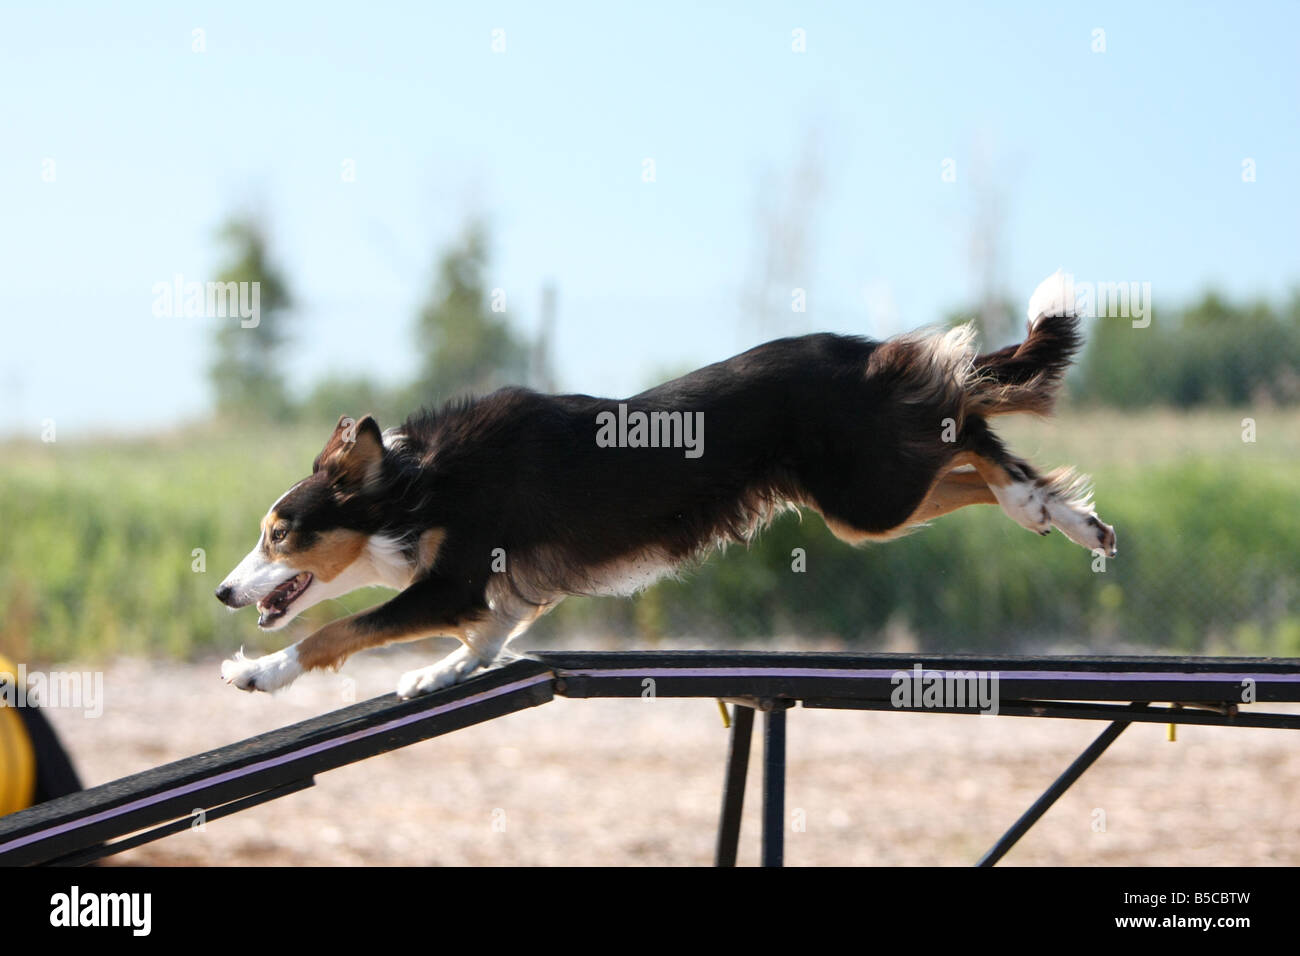 Border collie running across a dog walk at an agility trial. Stock Photo